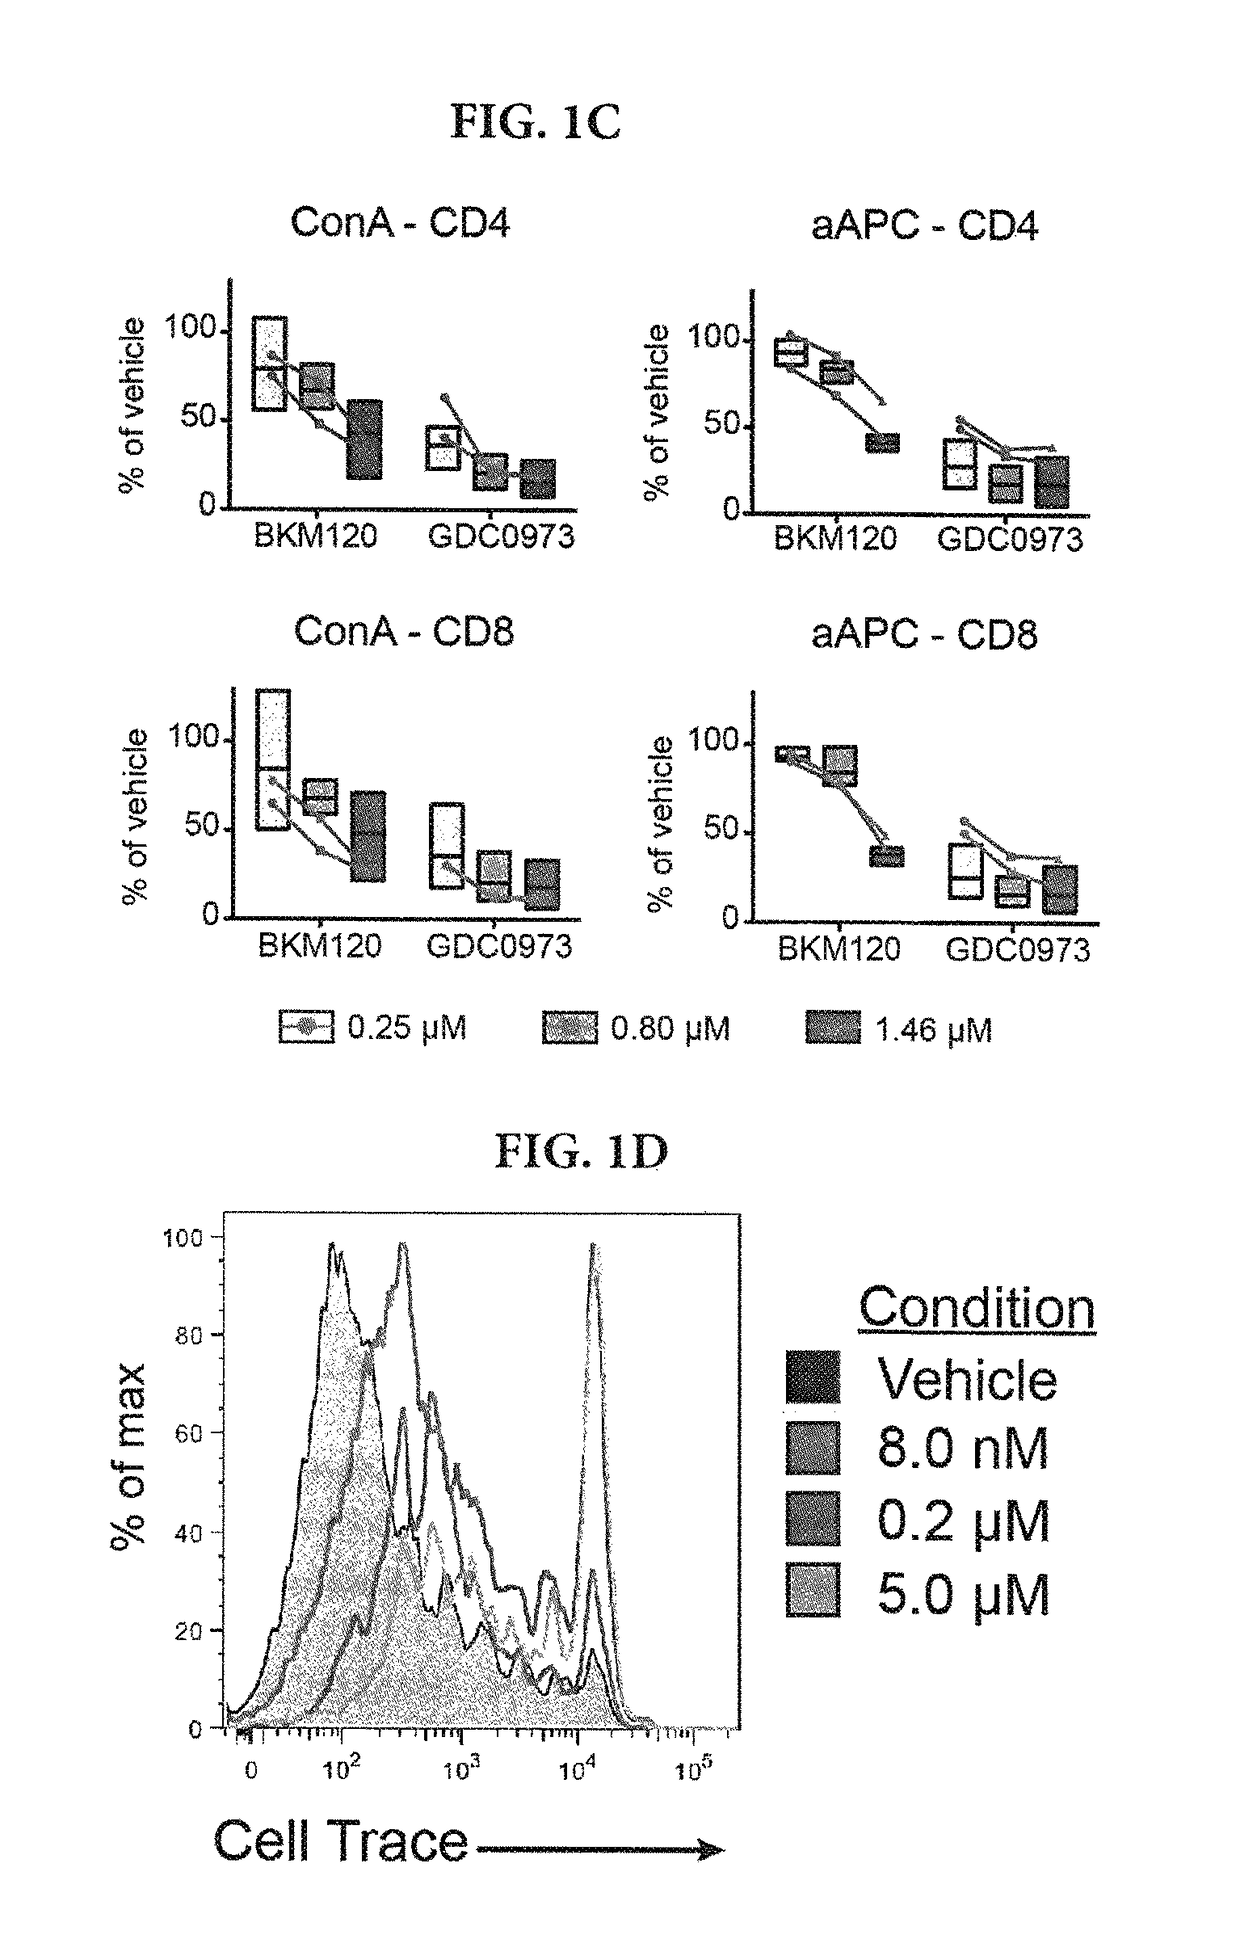 Method for treatment of metastatic and refractory cancers and tumors with an inducer that overcomes inhibition of T cell proliferation